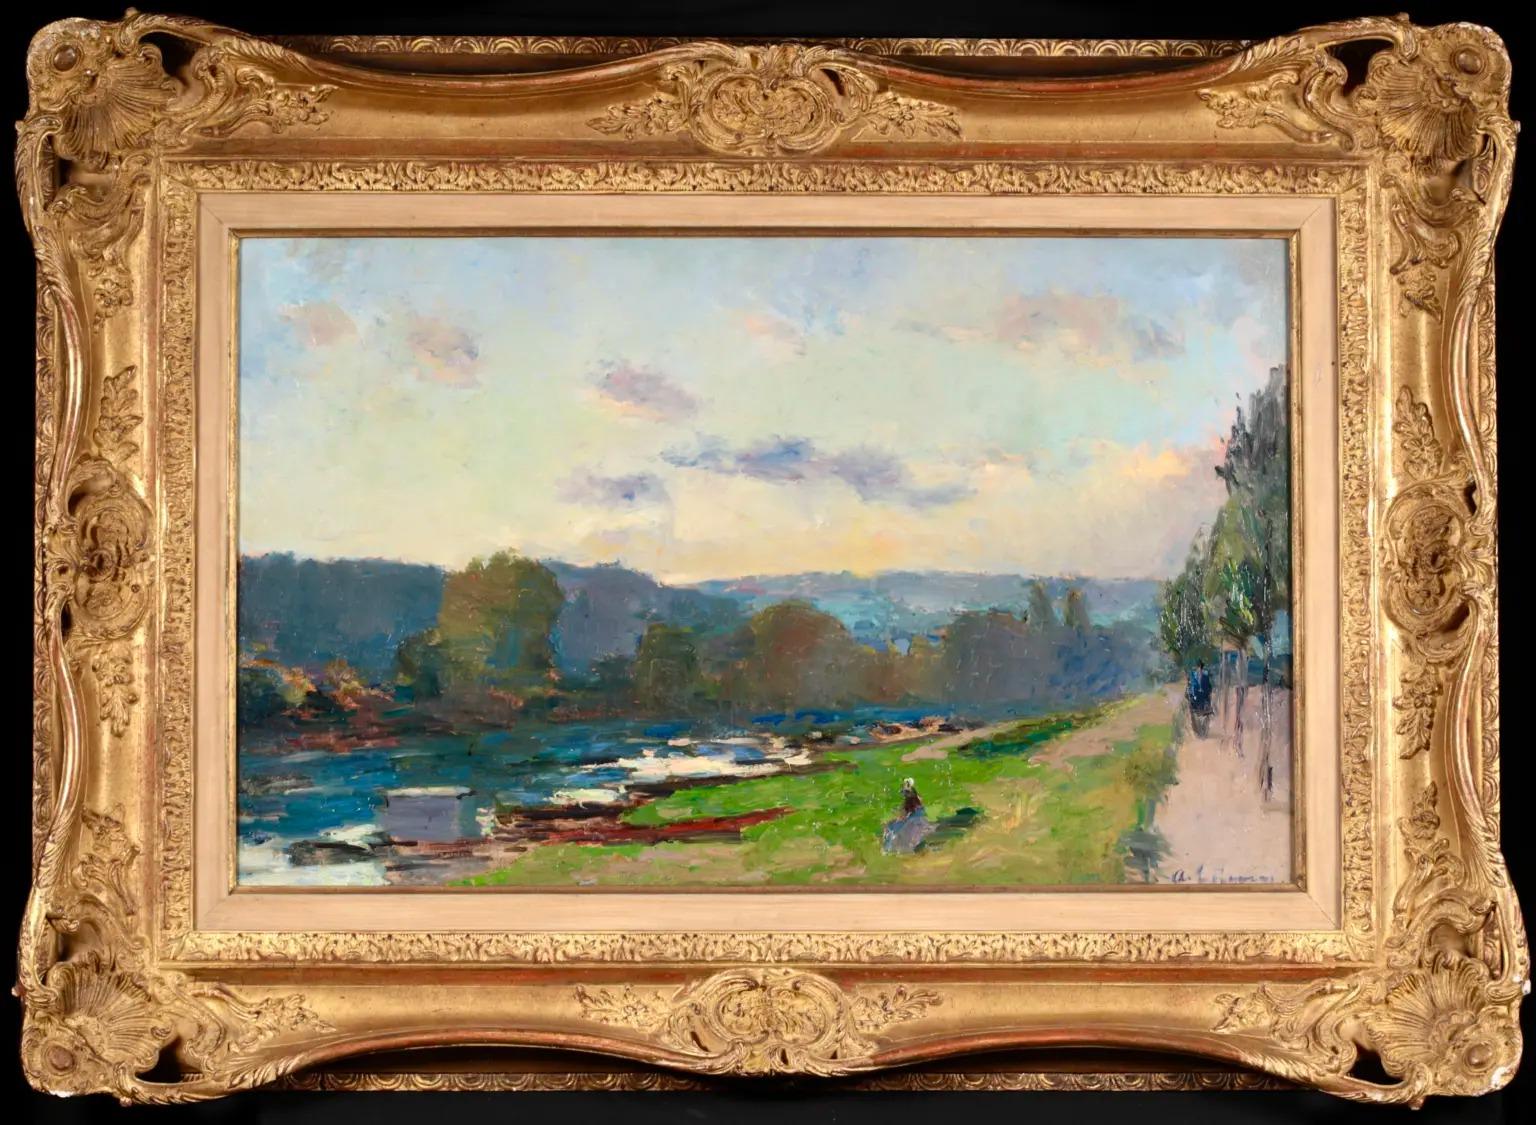 Signed figures in riverscape oil on original canvas circa 1895 by French post impressionist painter Albert Charles Lebourg. The work depicts a view of the River Seine on a warm, sunny summer's day. There is a young lady sat on the green, grassy bank